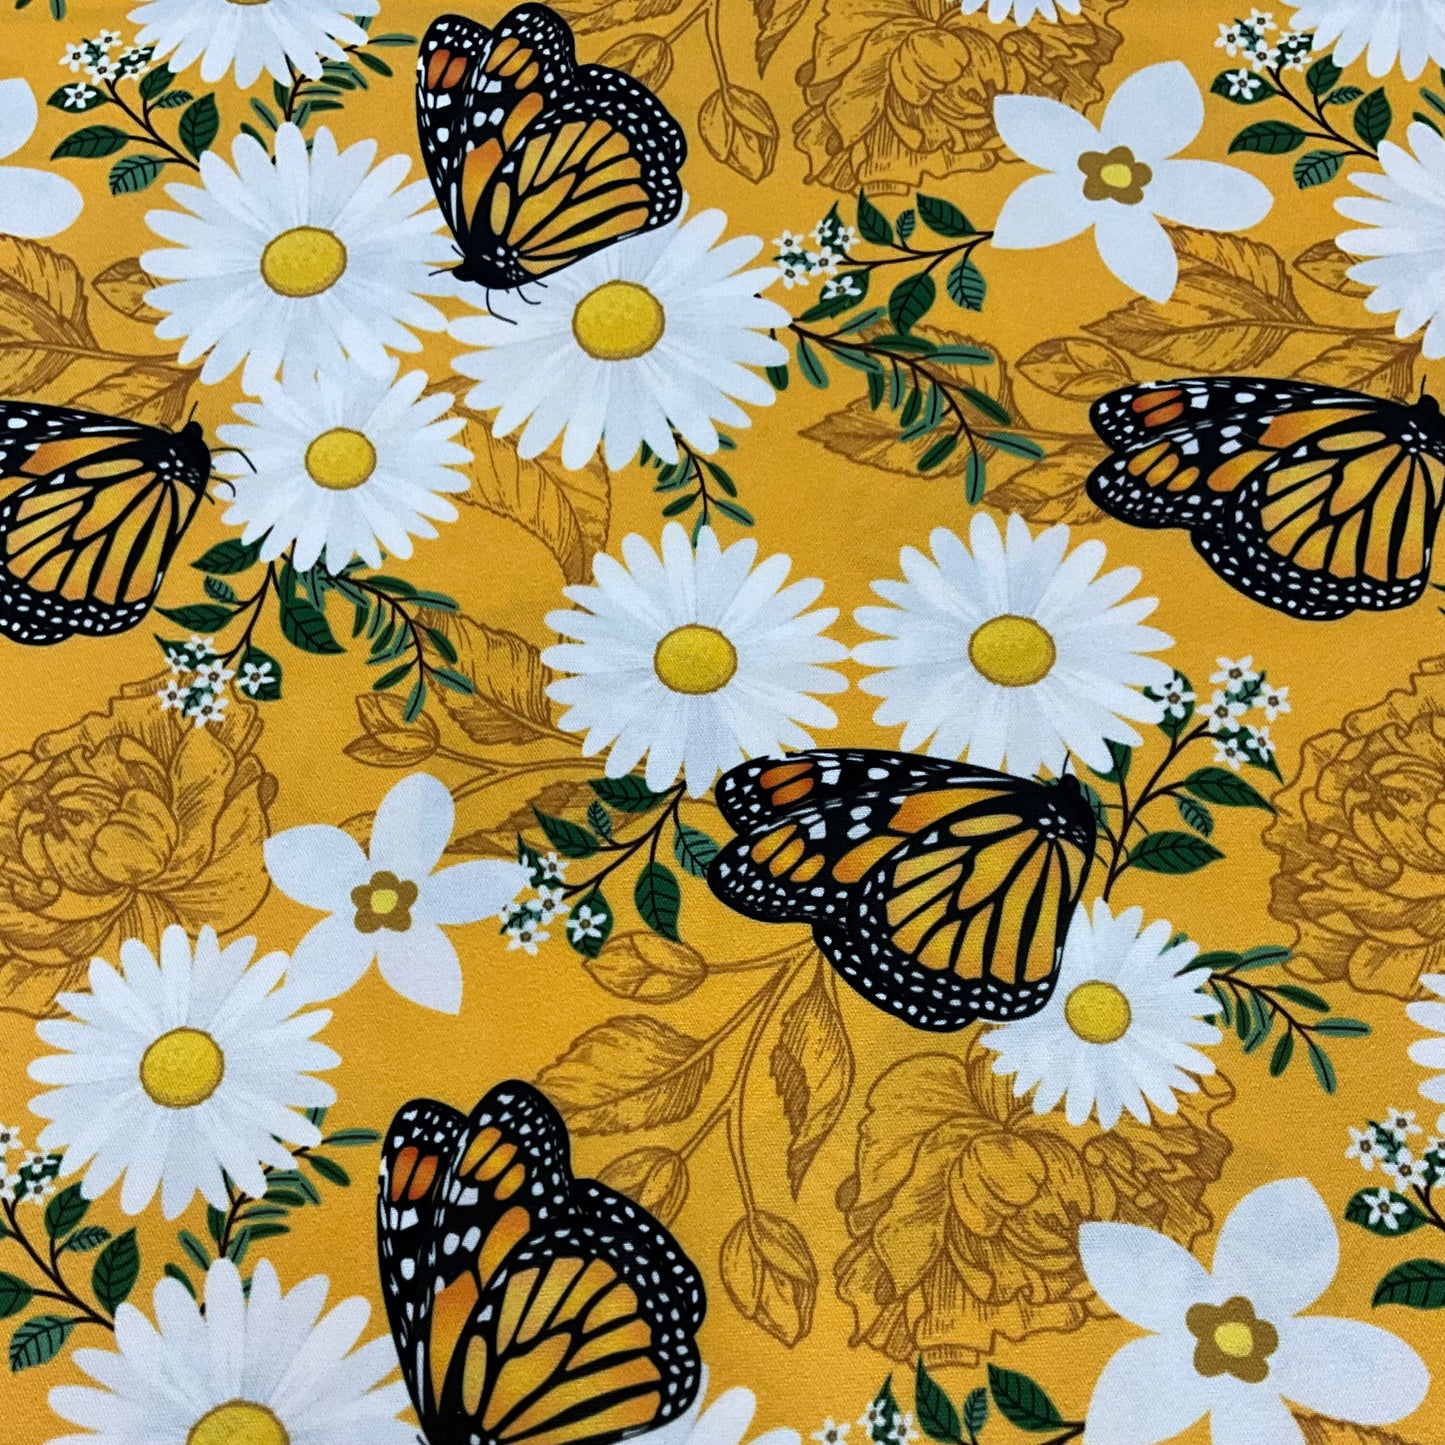 Daisies and Butterflies